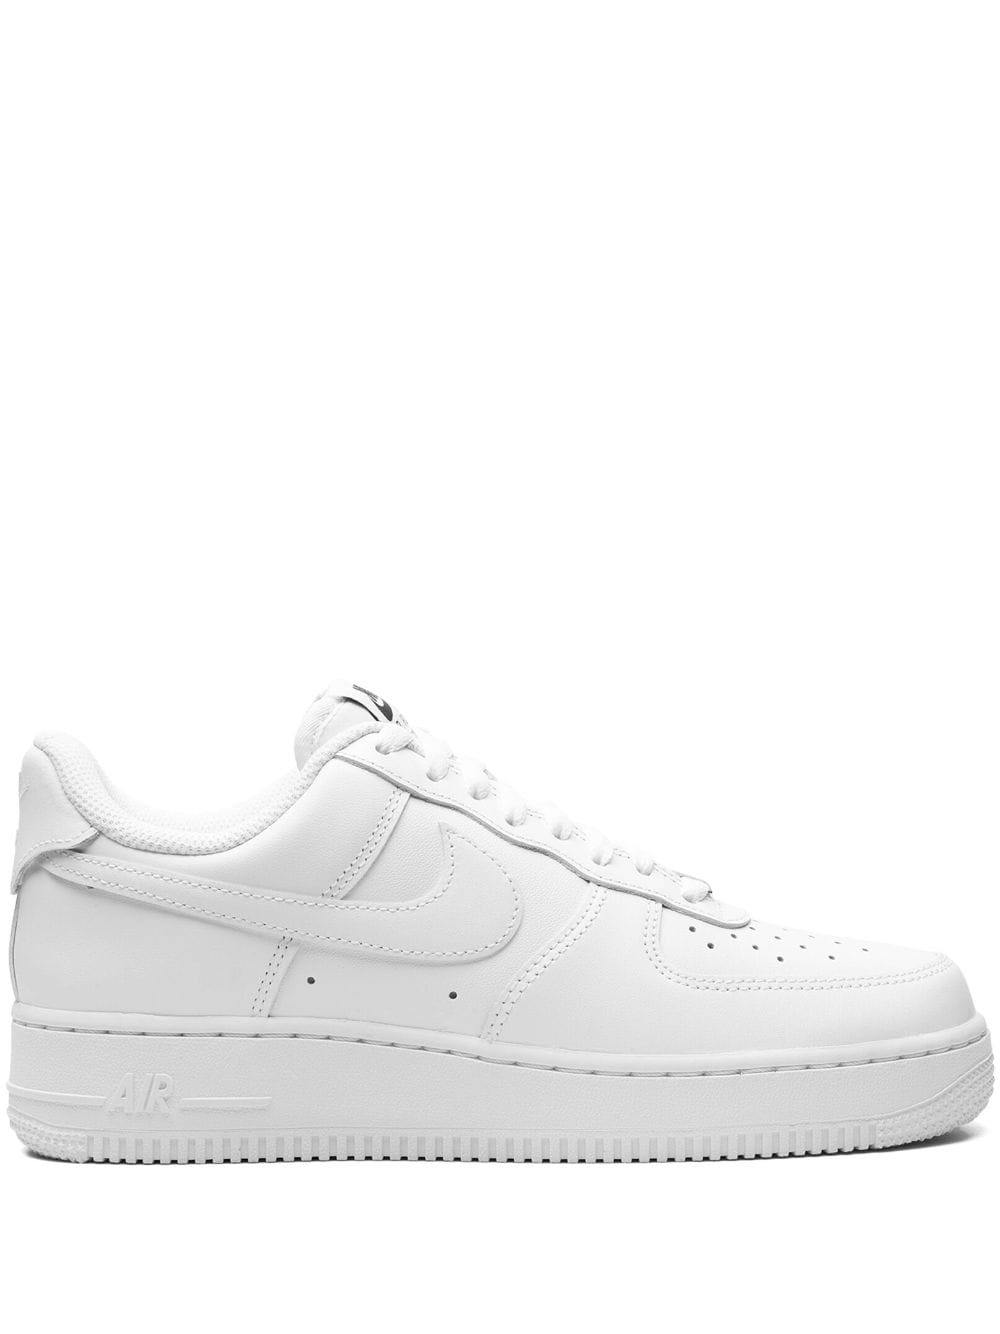 Nike Air Force 1 Flyease Low-top Sneakers In White